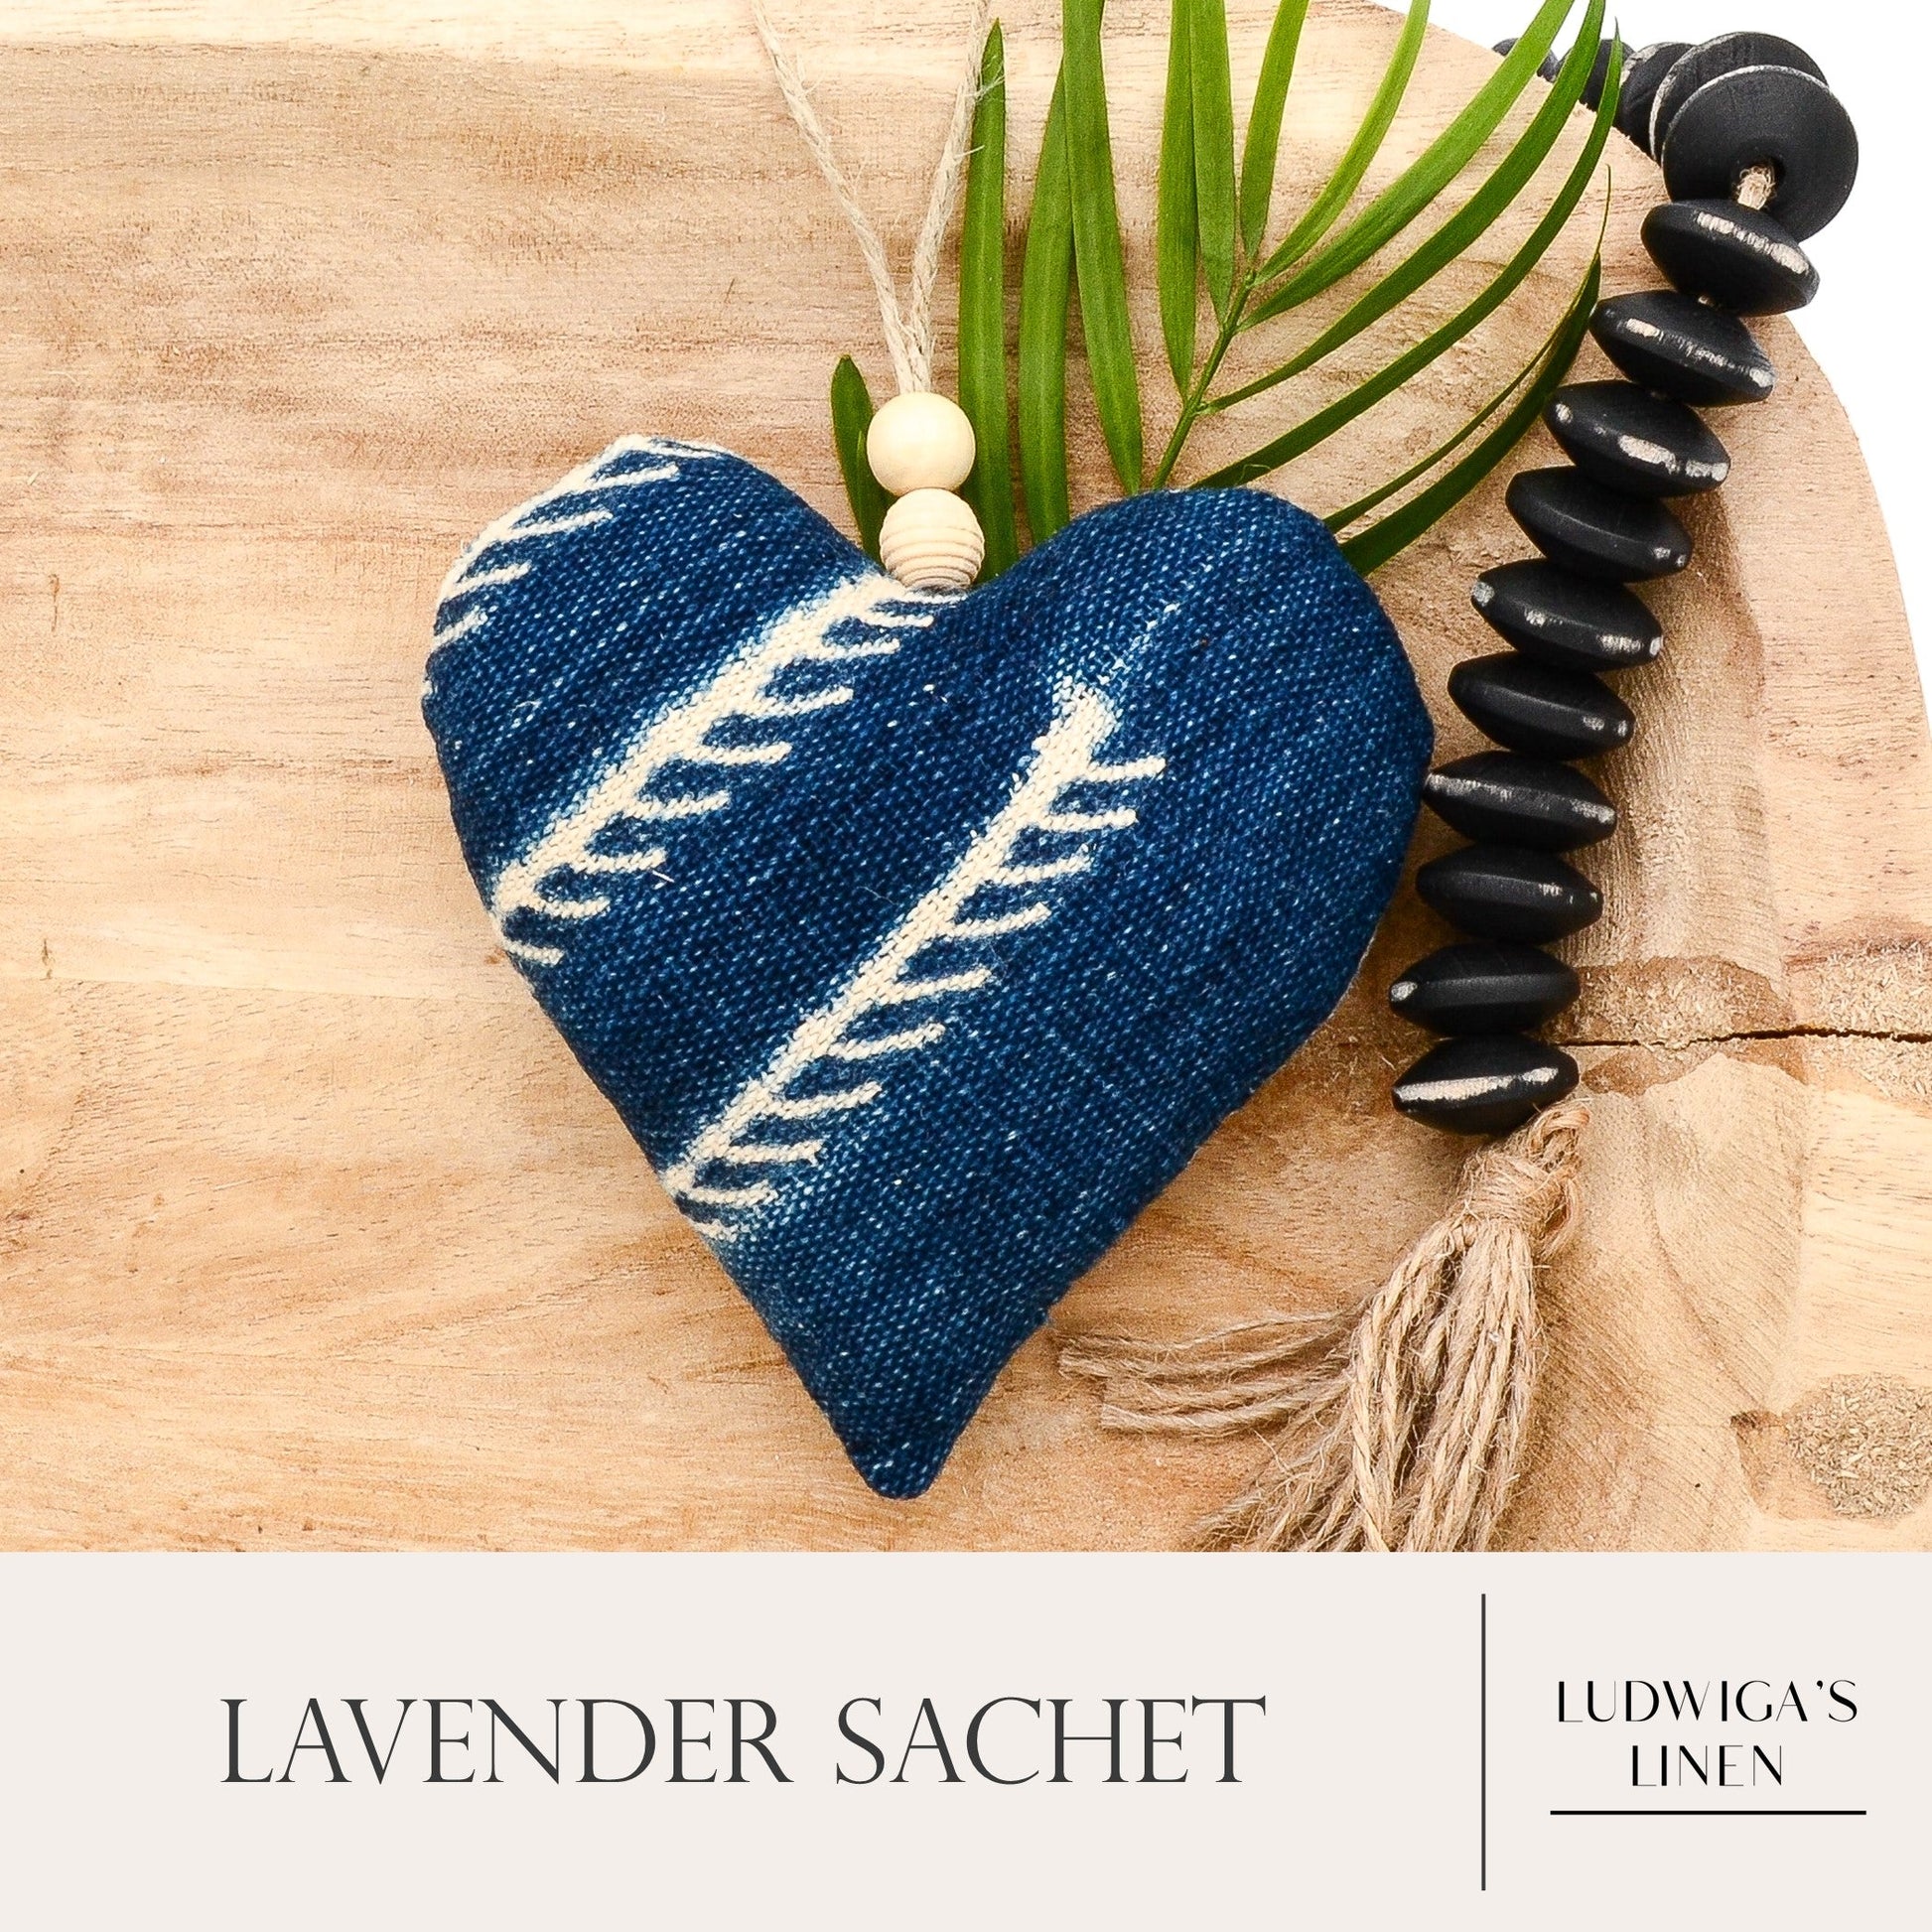 Lavender sachet heart made from handwoven African indigo cotton, hemp twine tie with wooden beads, and filled with high quality lavender from Provence France